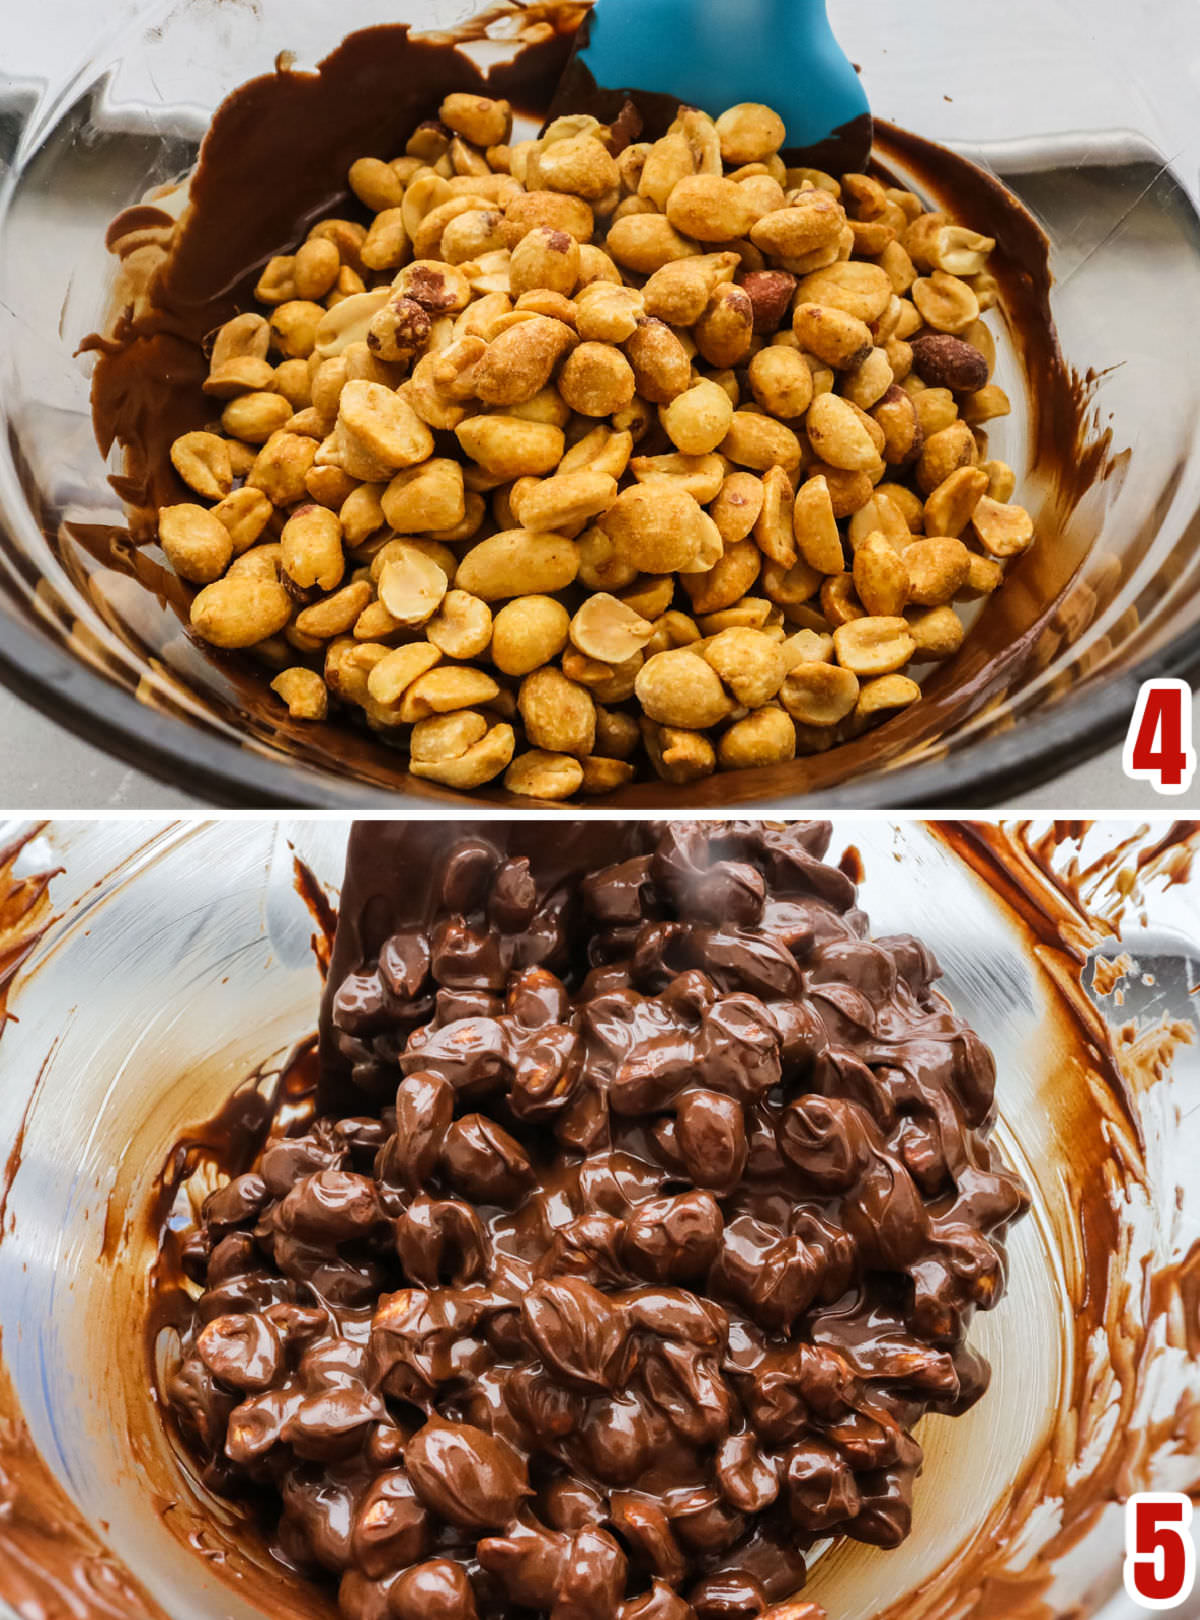 Collage image showing the steps for adding the peanuts to the melted chocolate mixture.